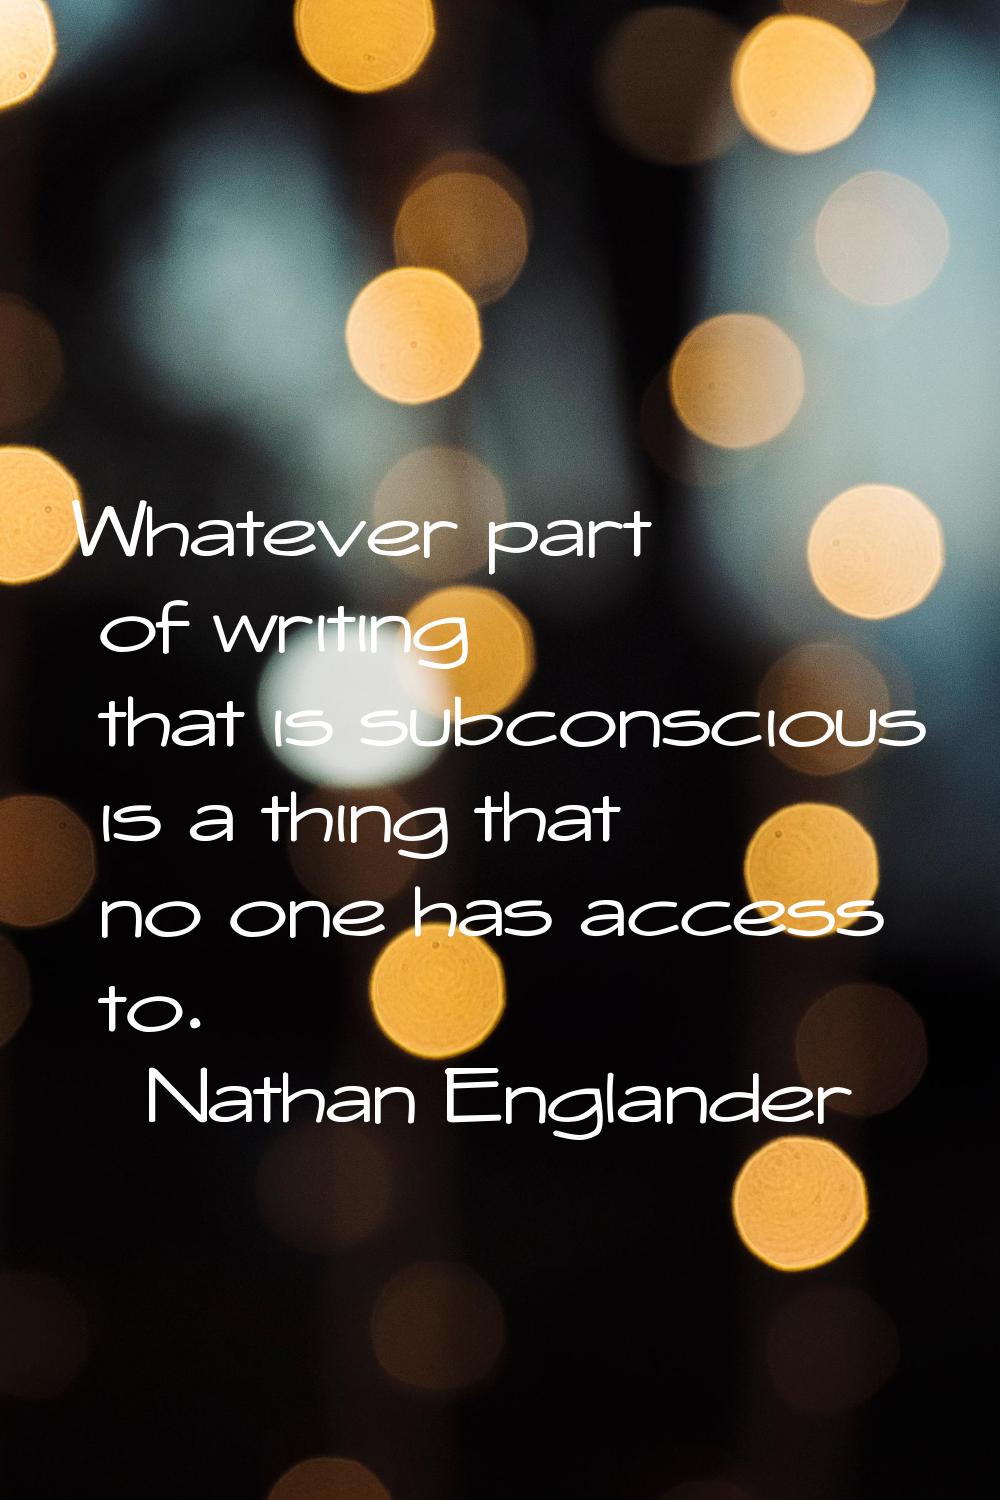 Whatever part of writing that is subconscious is a thing that no one has access to.